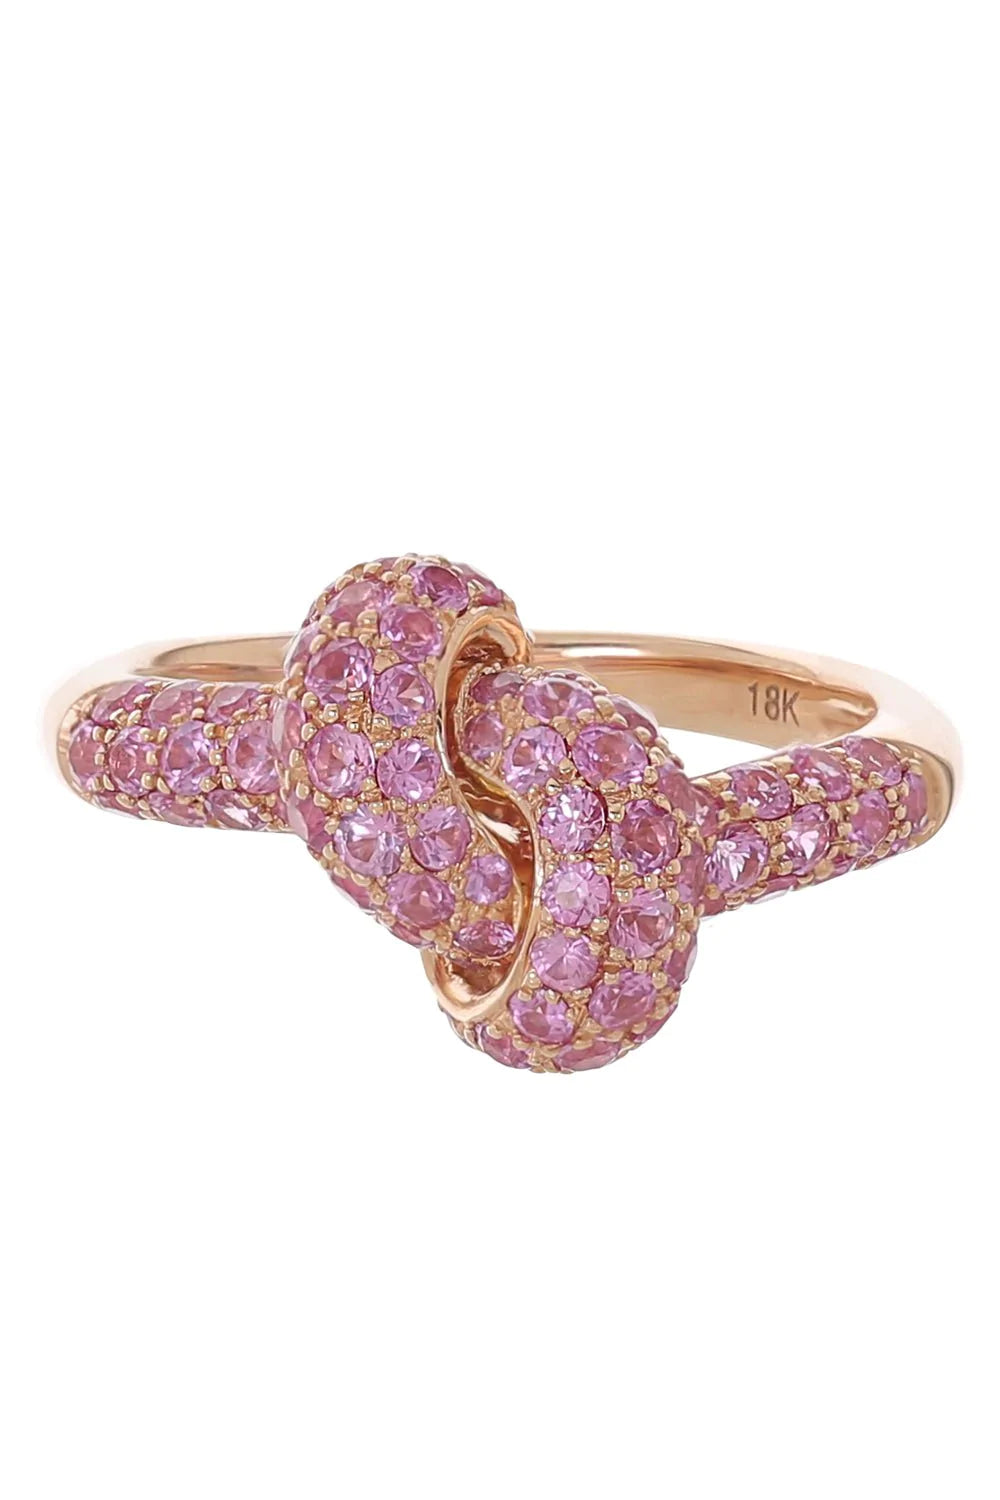 THE LOVE KNOT BY CORALIE-Pink Sapphire Knot Ring-ROSE GOLD